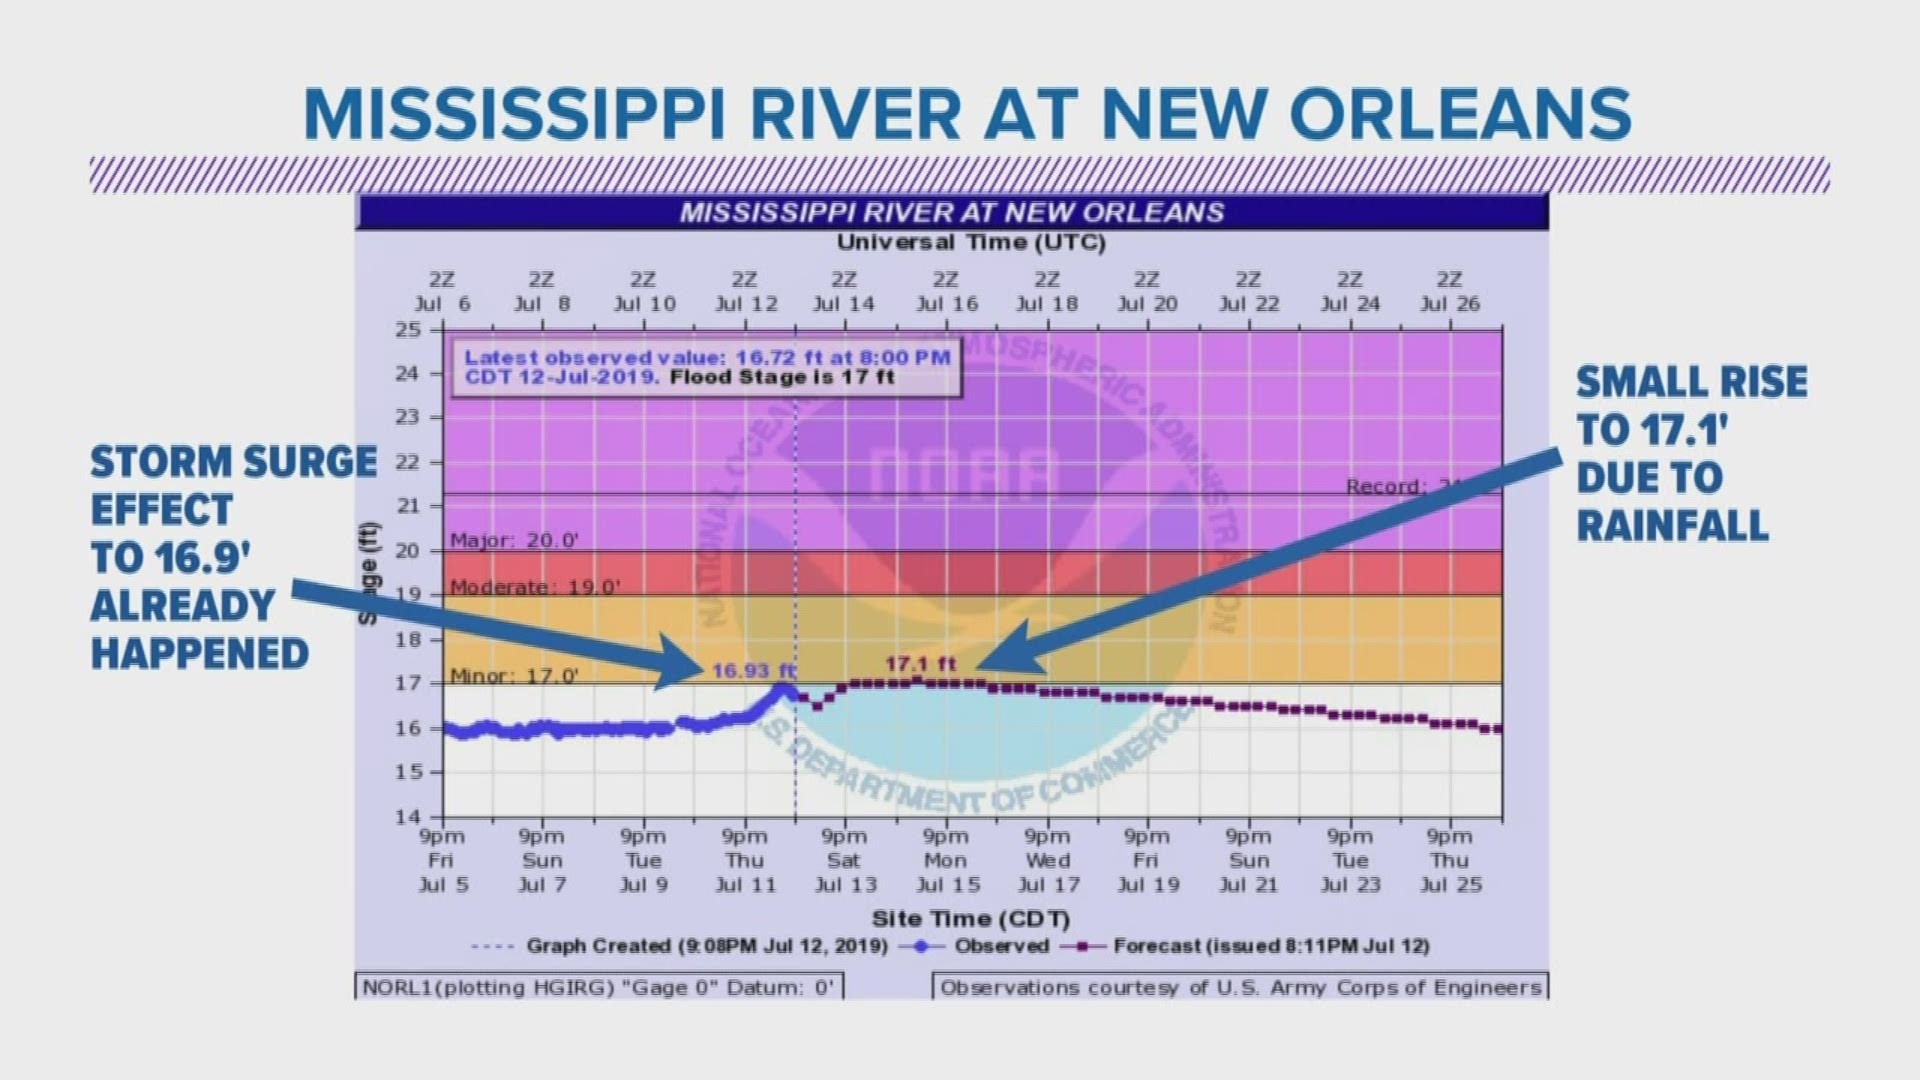 The river reached 16.9 feet Friday afternoon and may continue to fall before it goes up slightly -- it may go back up to 17 feet, says WWL meteorologist.